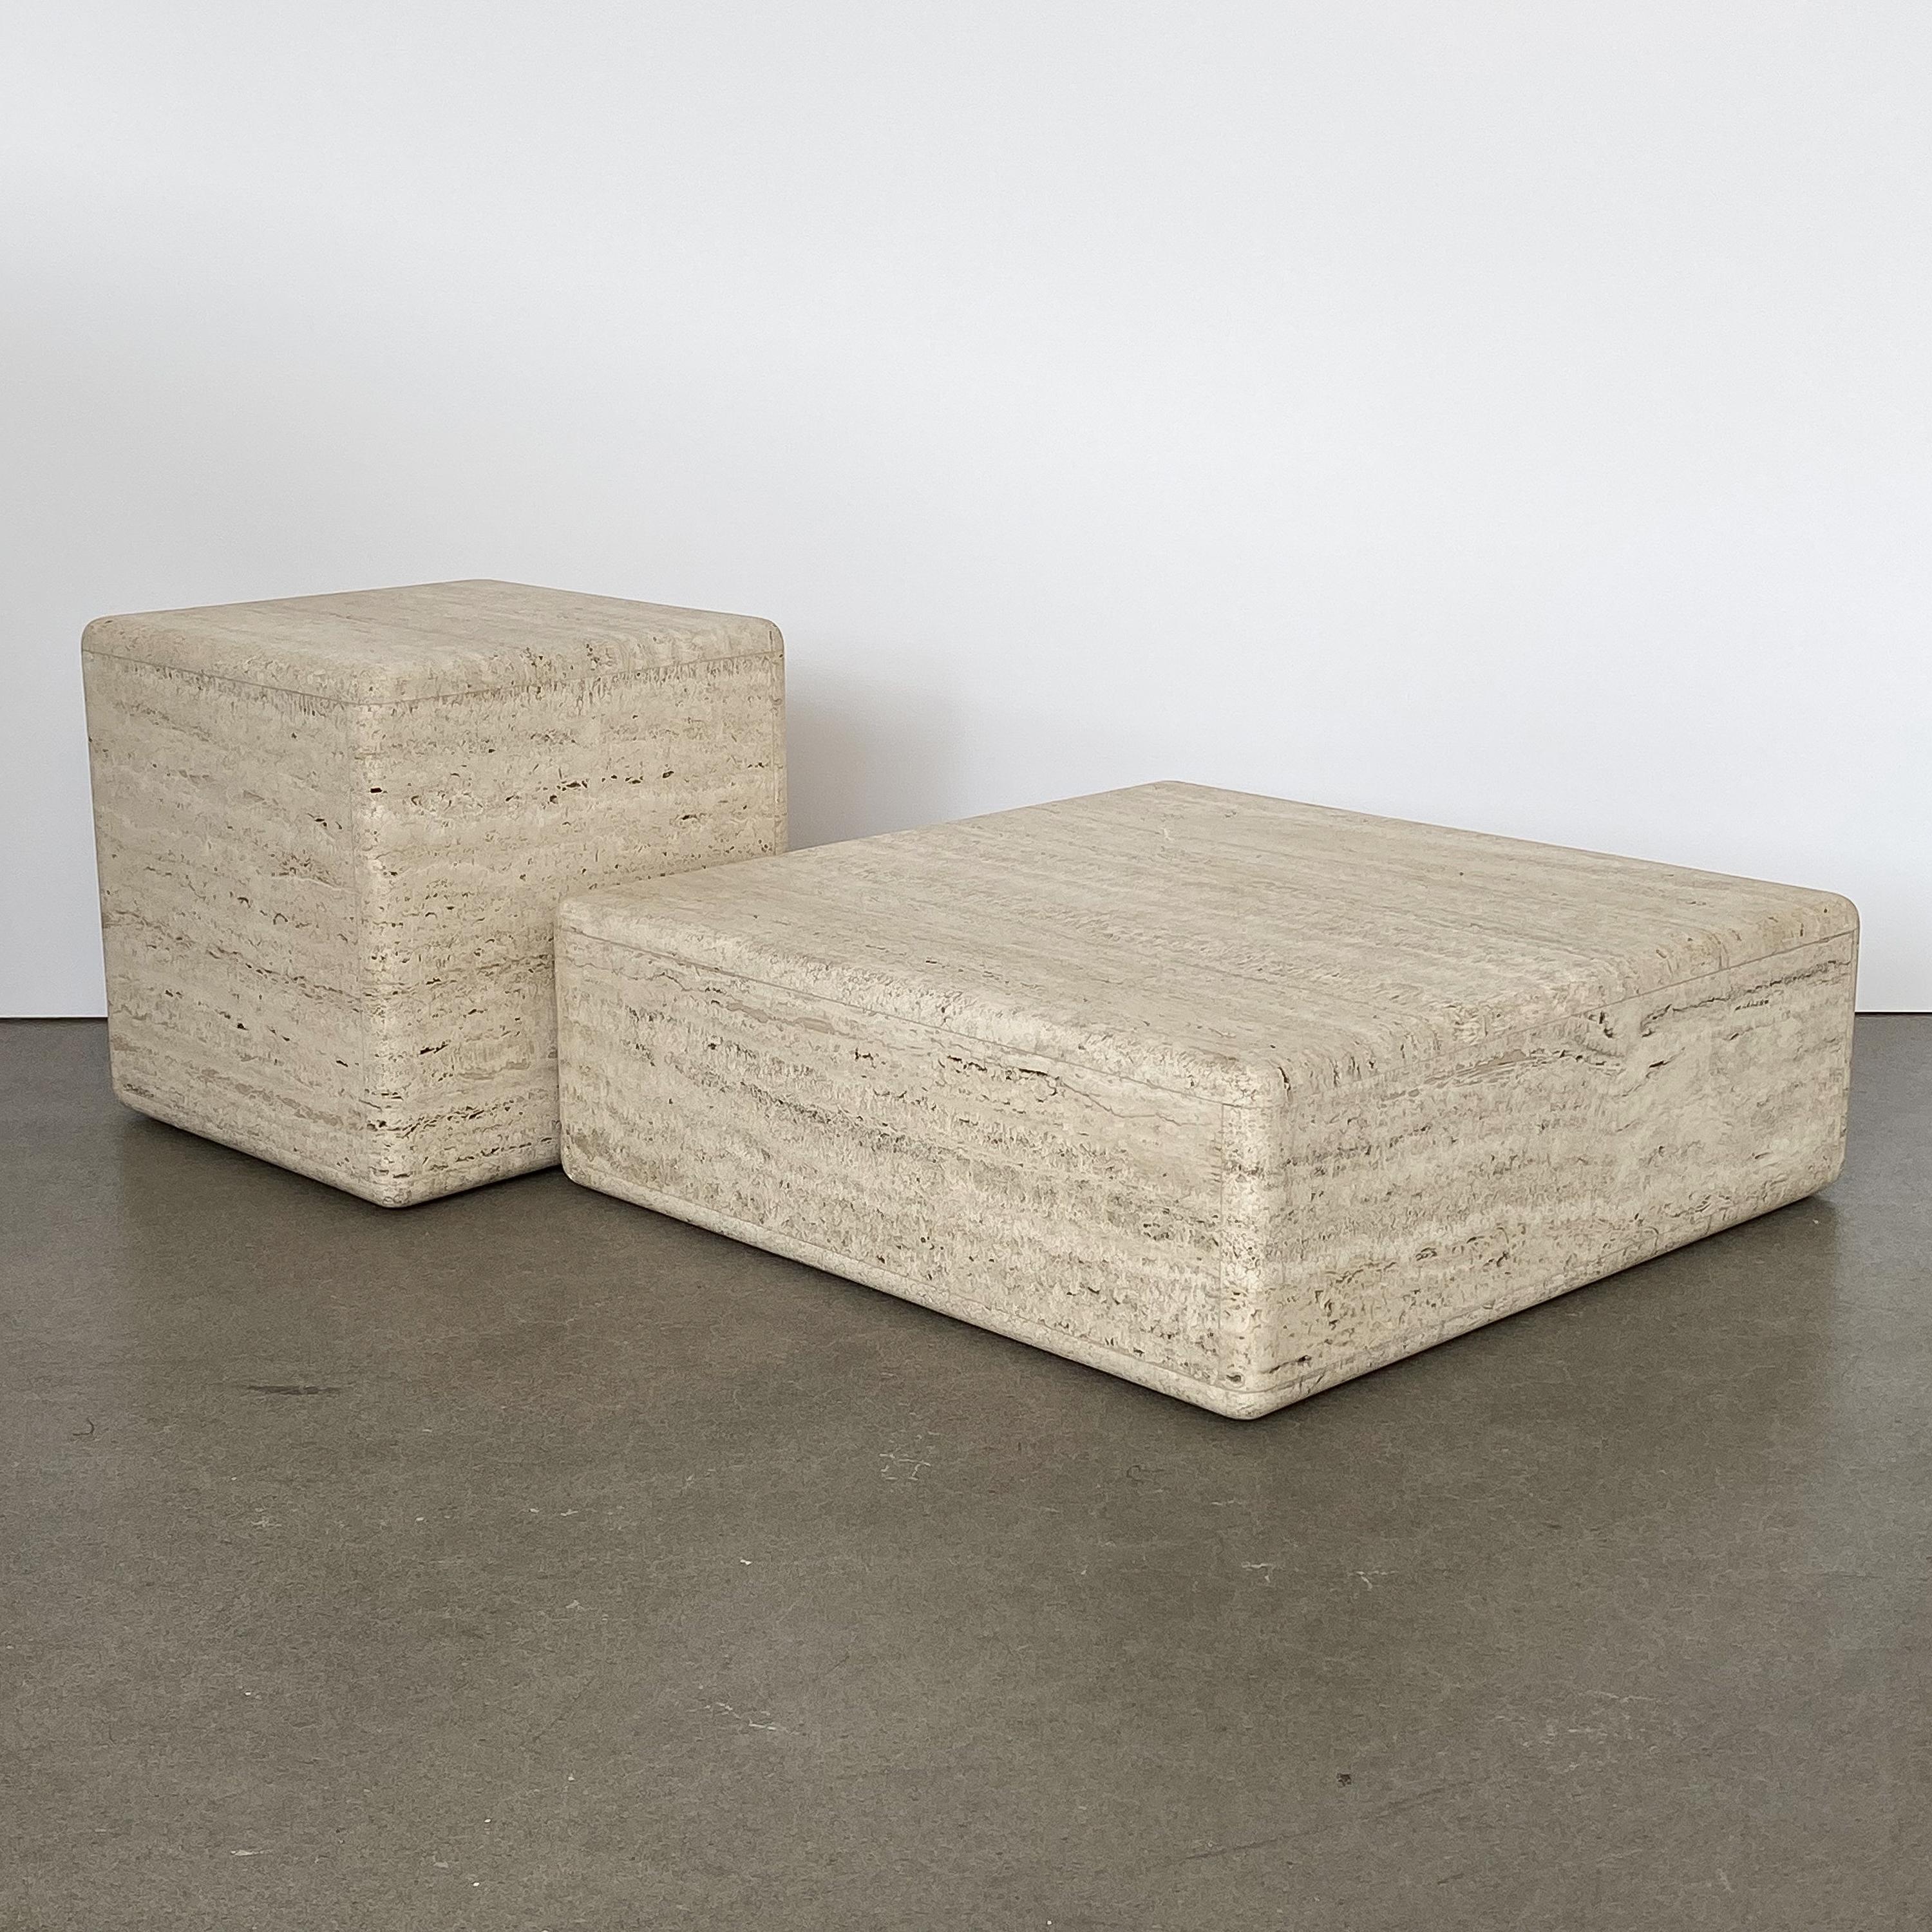 Two-Piece Travertine Cube Tiered Coffee Table 1